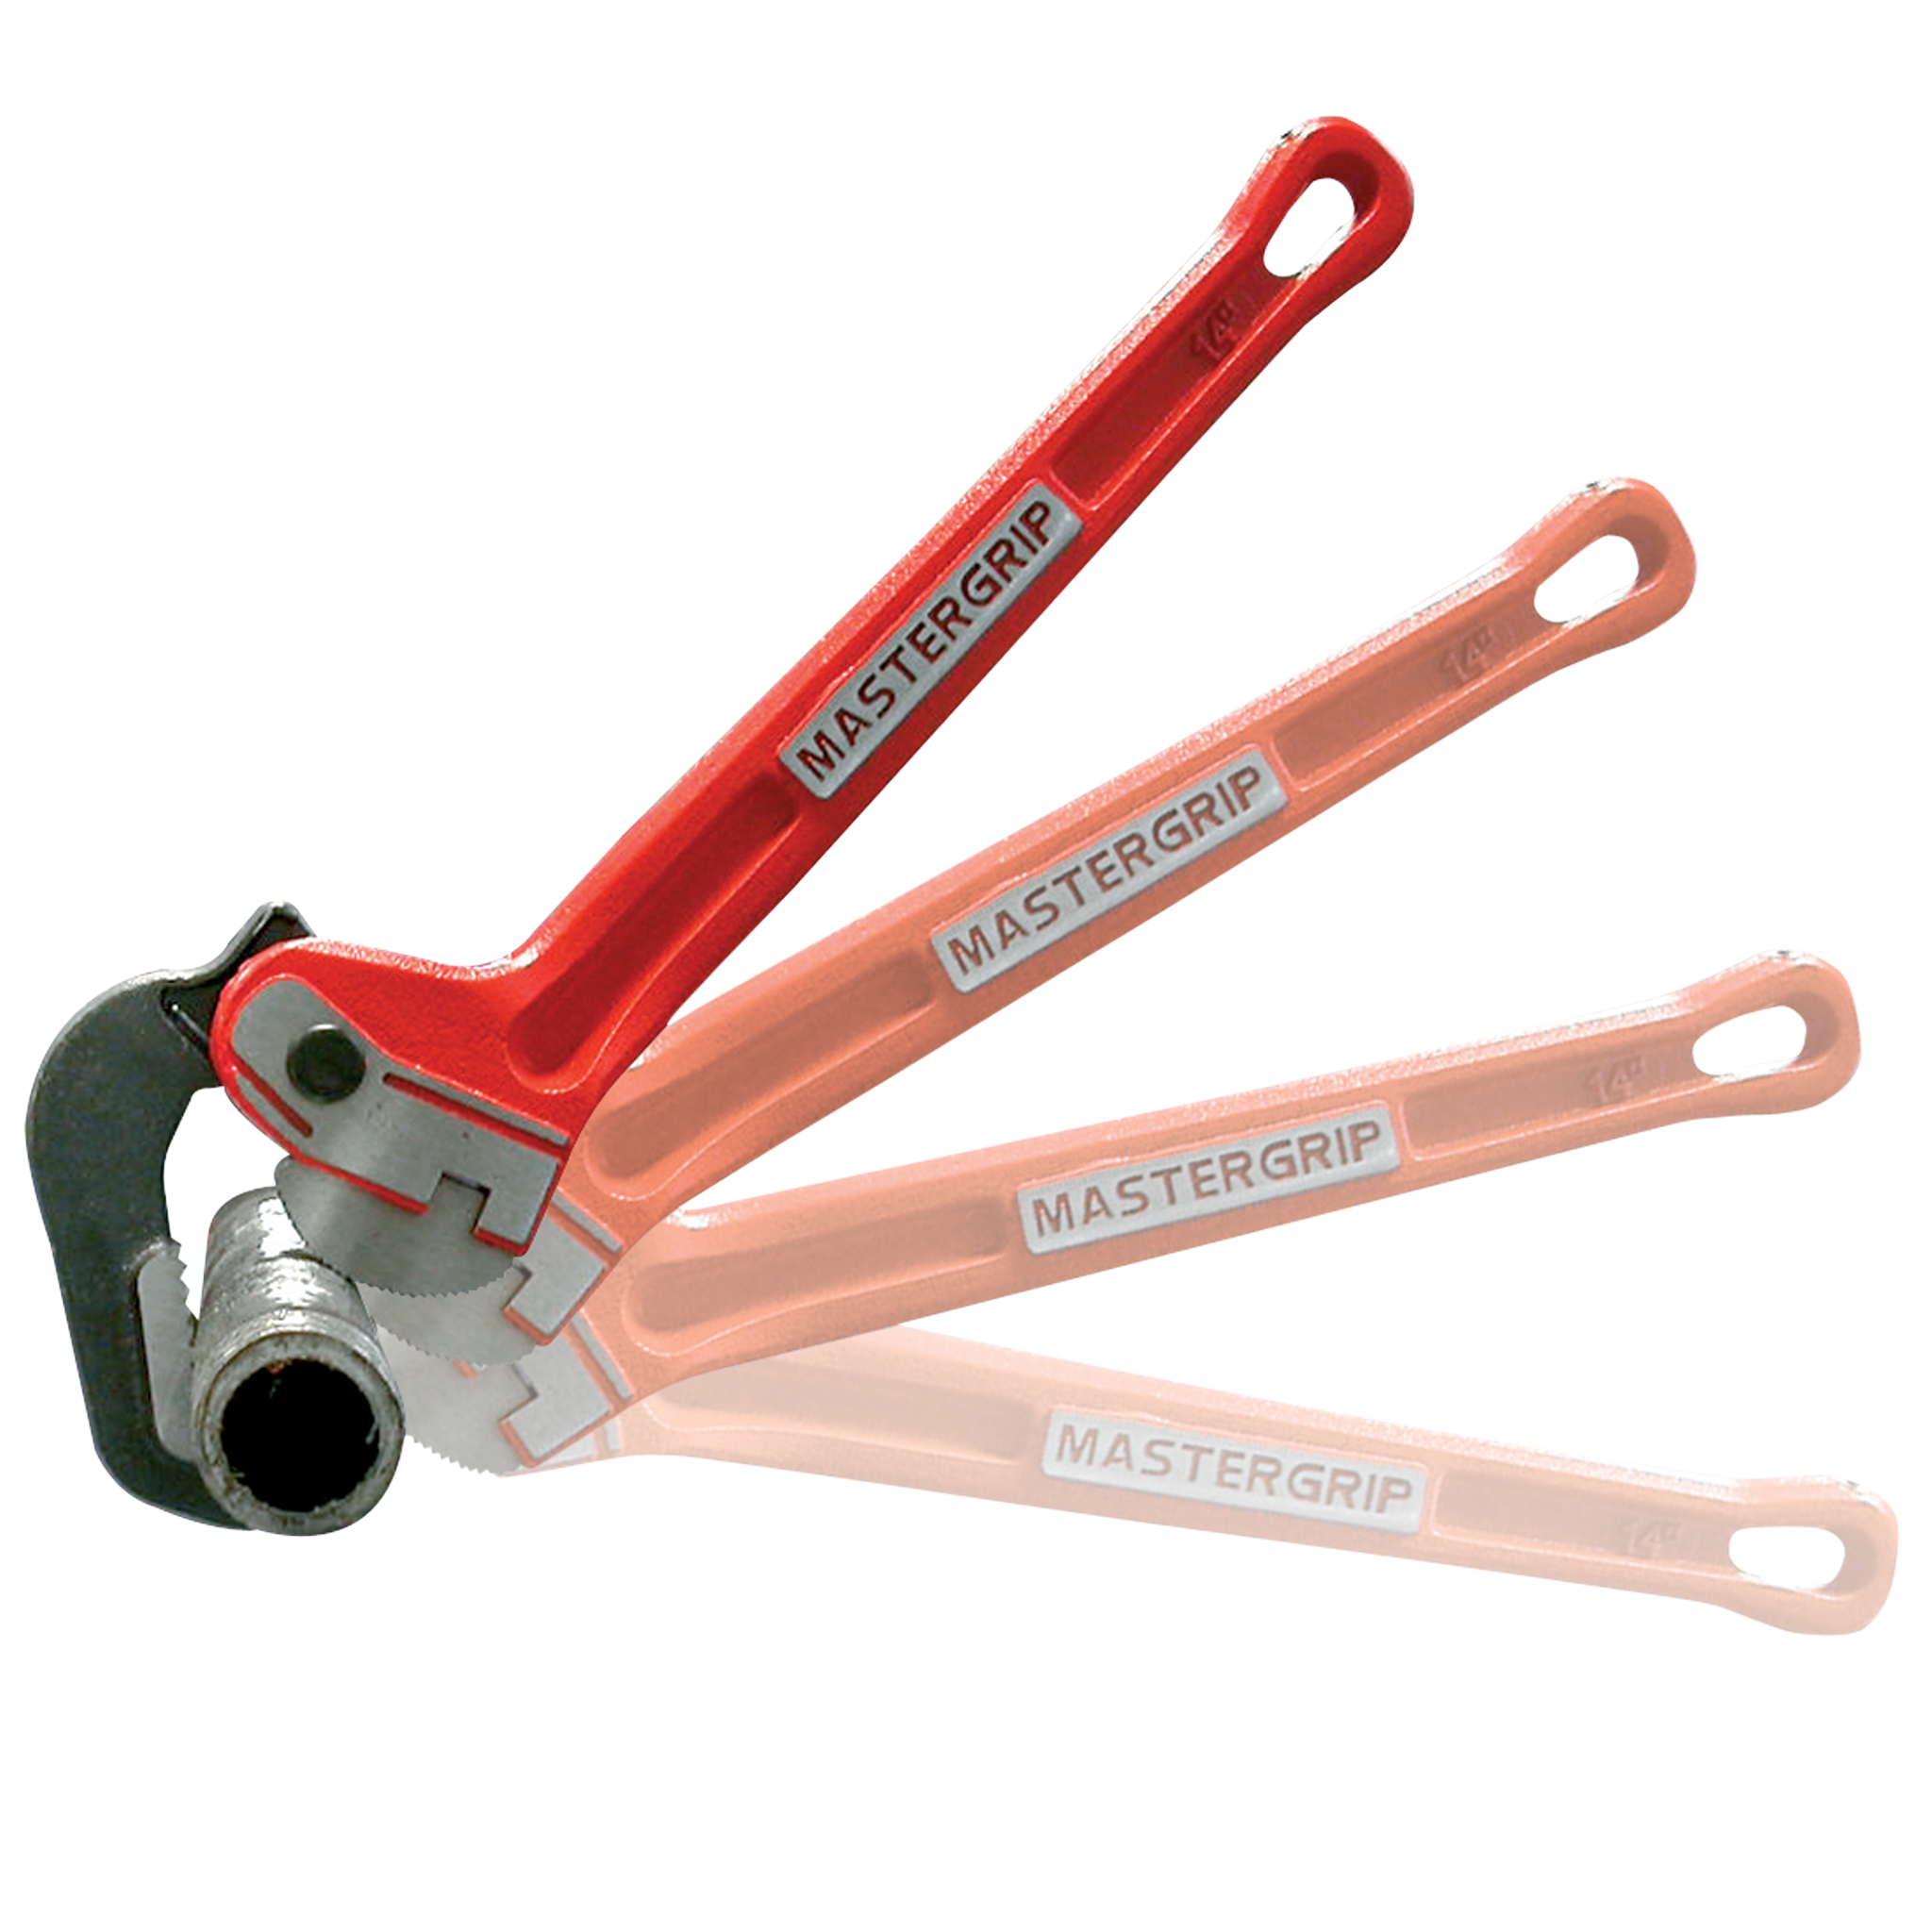 Plumbers Rapid Wrench | Gray Tools Online Store